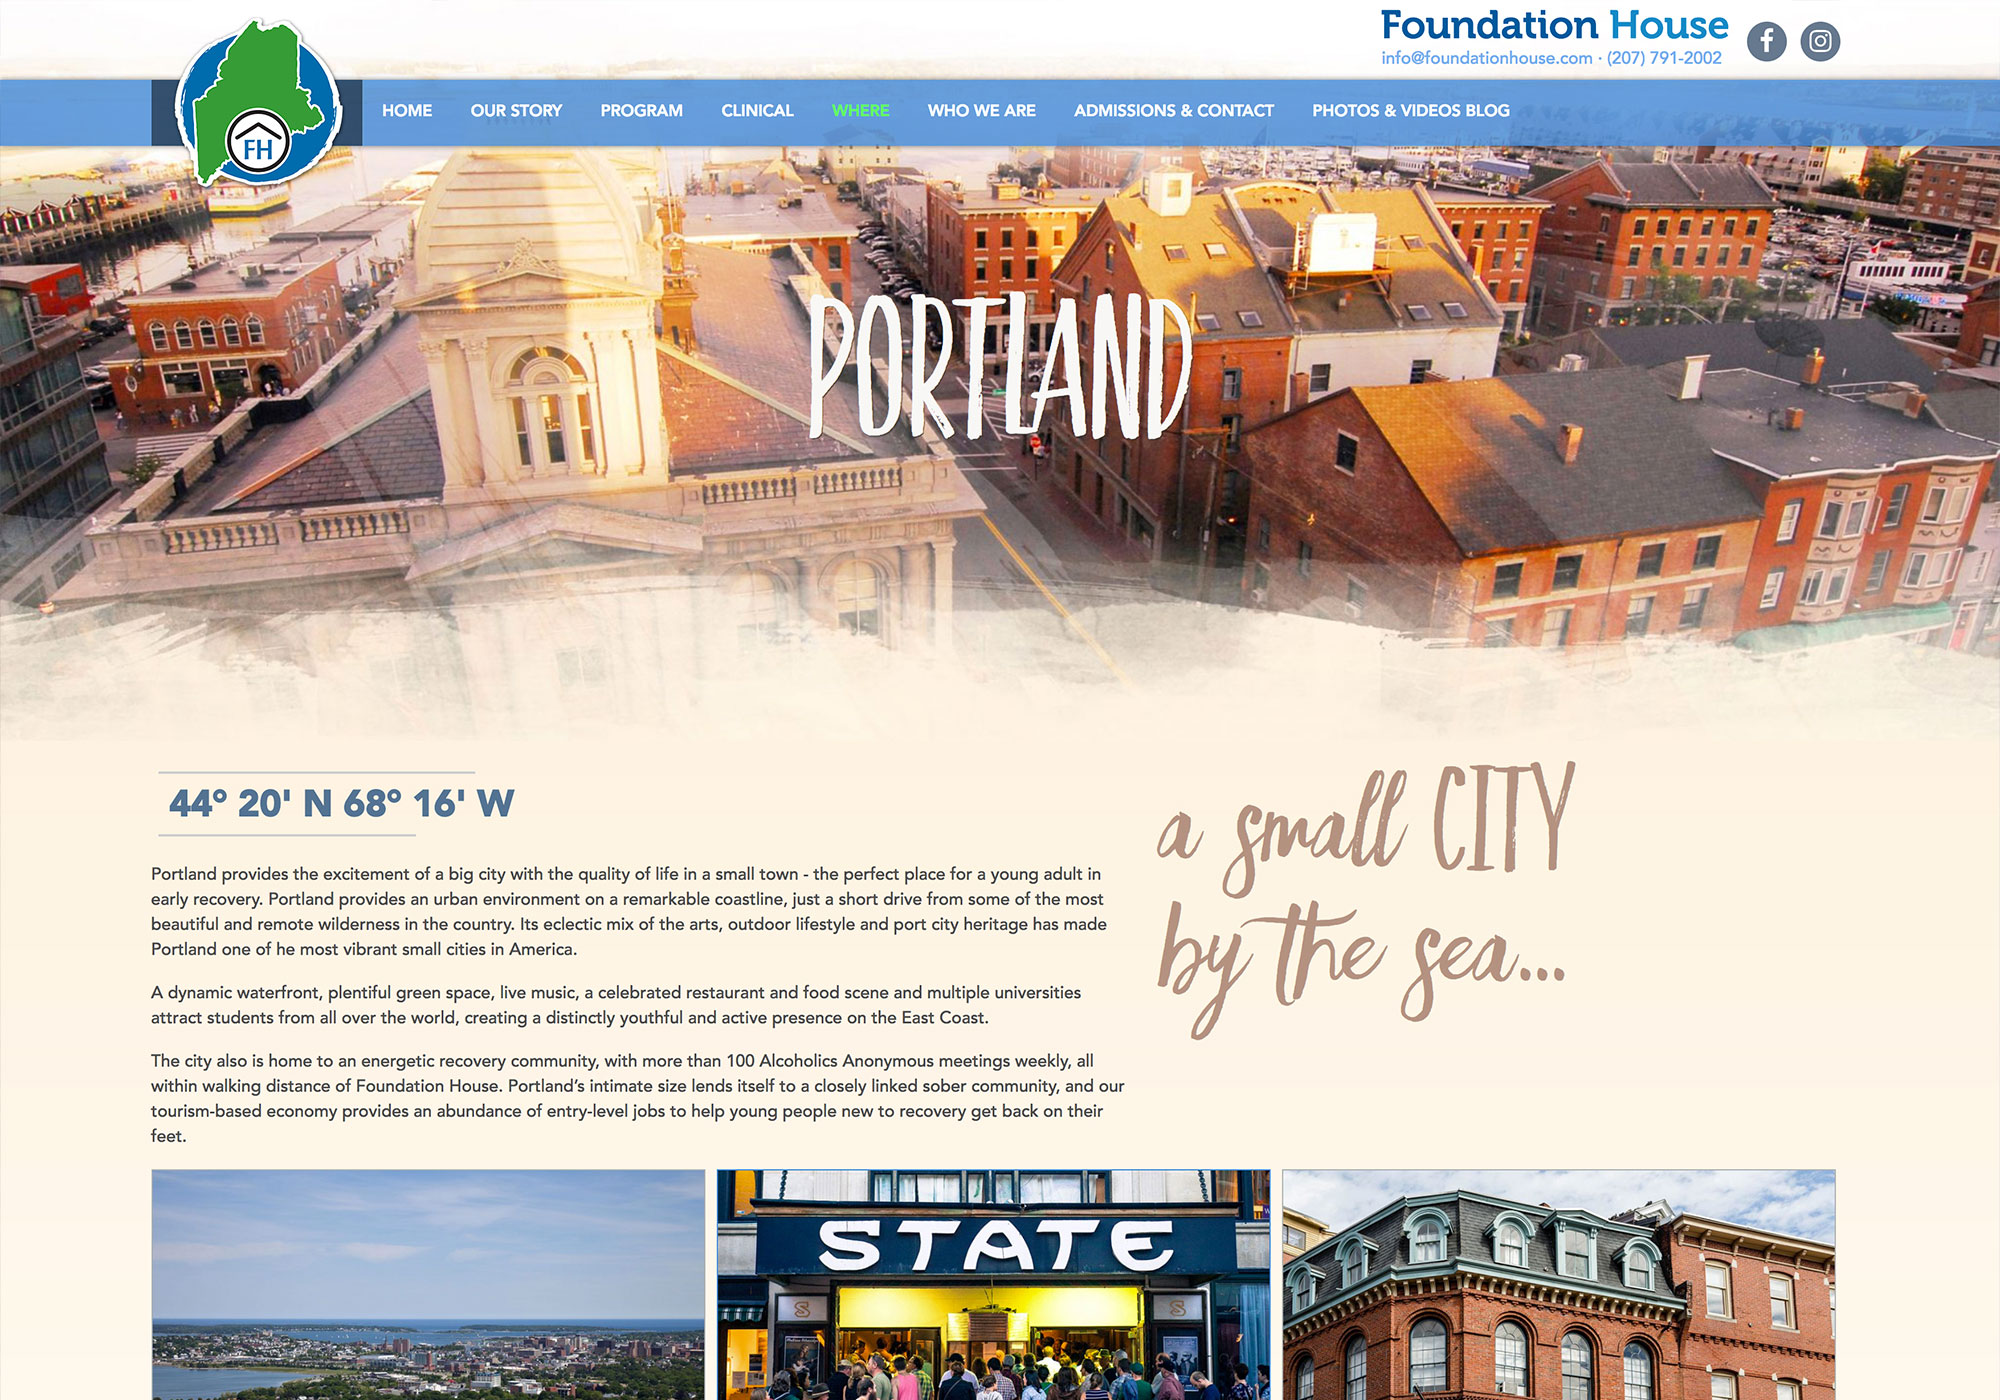 Maine web design company, SlickFish Studios, designed and developed the new Foundation House - a screenshot of part of the Portland, Maine page.